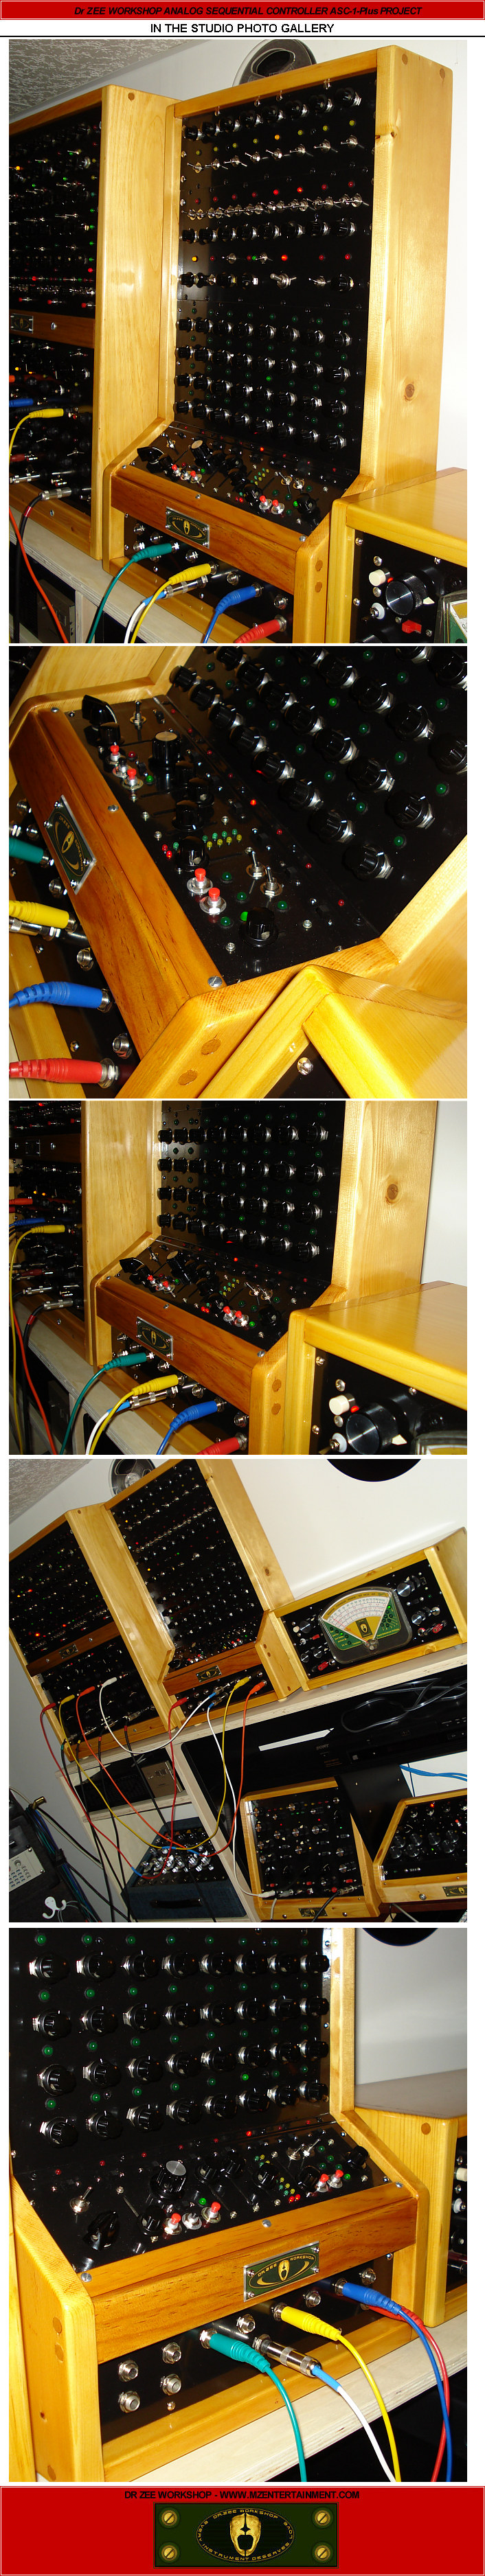 dr_zee_ASC1_plus_8x4x8x8_analog_sequential_controller_in_the_studio.jpg